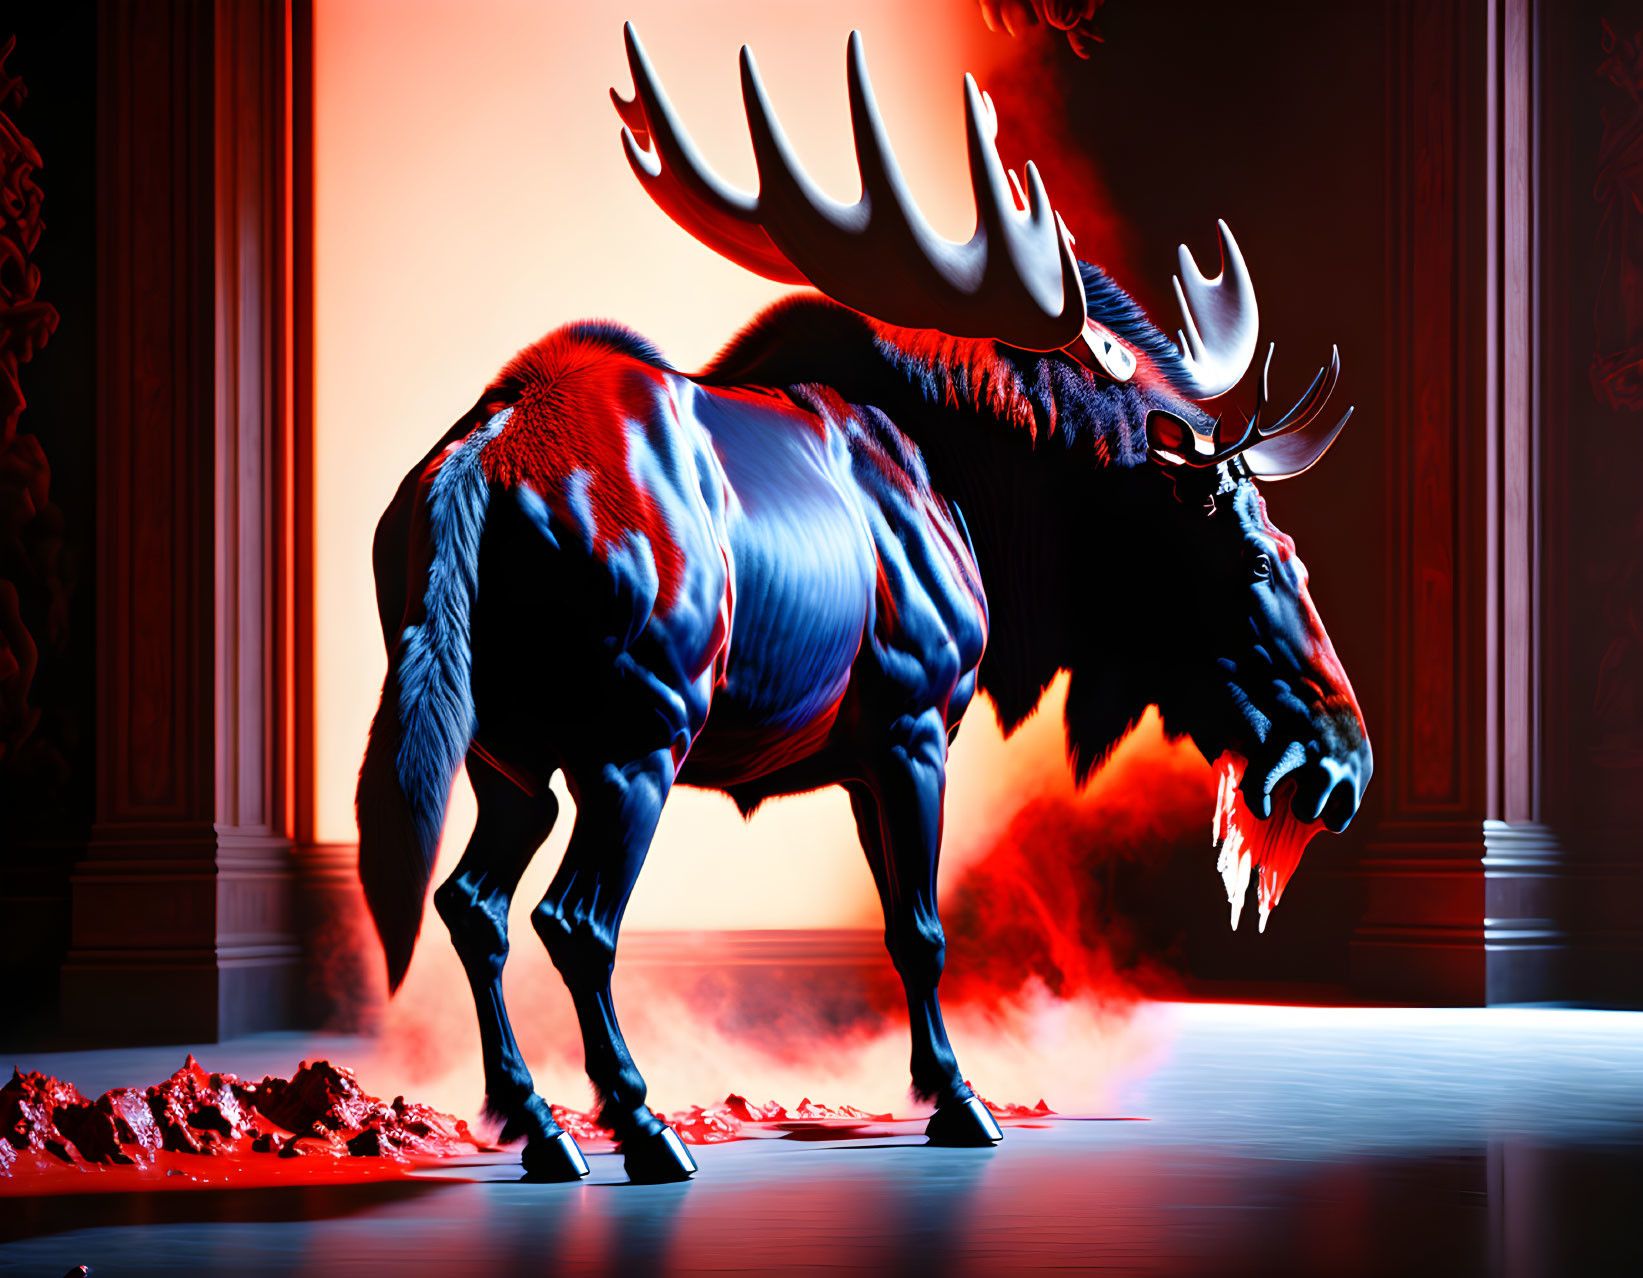 Majestic moose with glowing antlers in red-lit room